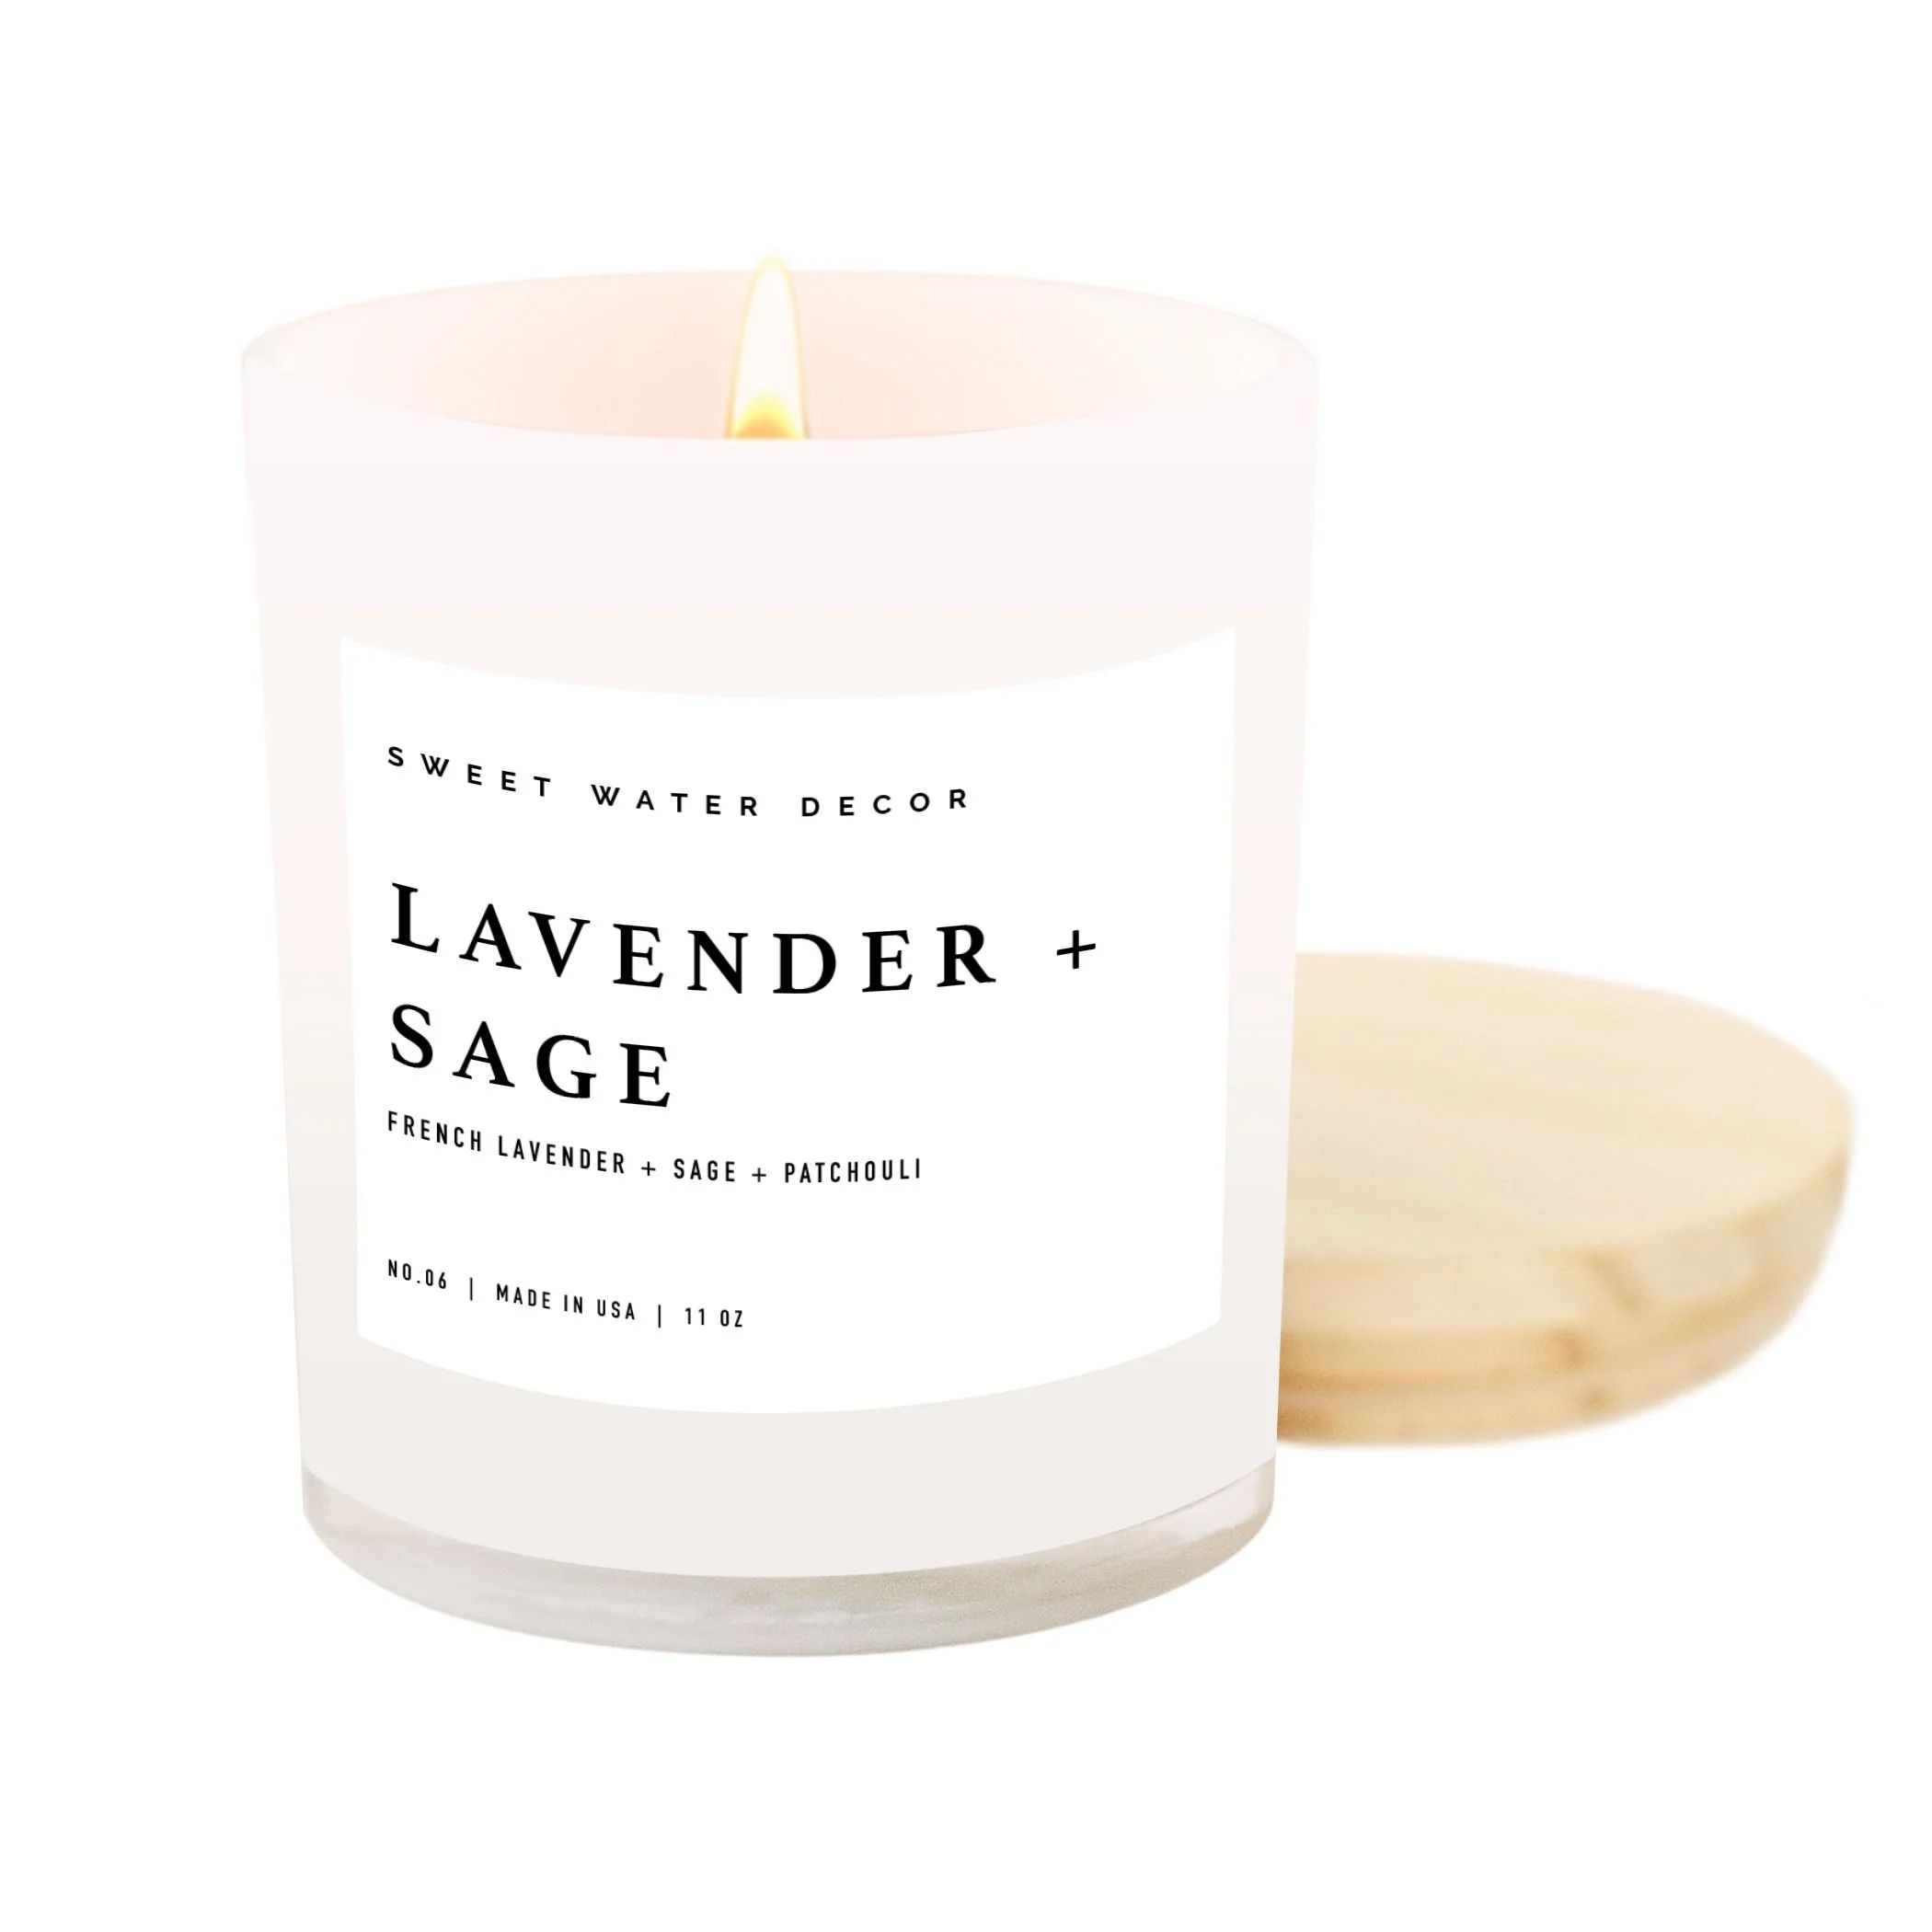 Lavender and Sage Soy Candle - White Jar - 11 oz | Sweet Water Decor, LLC